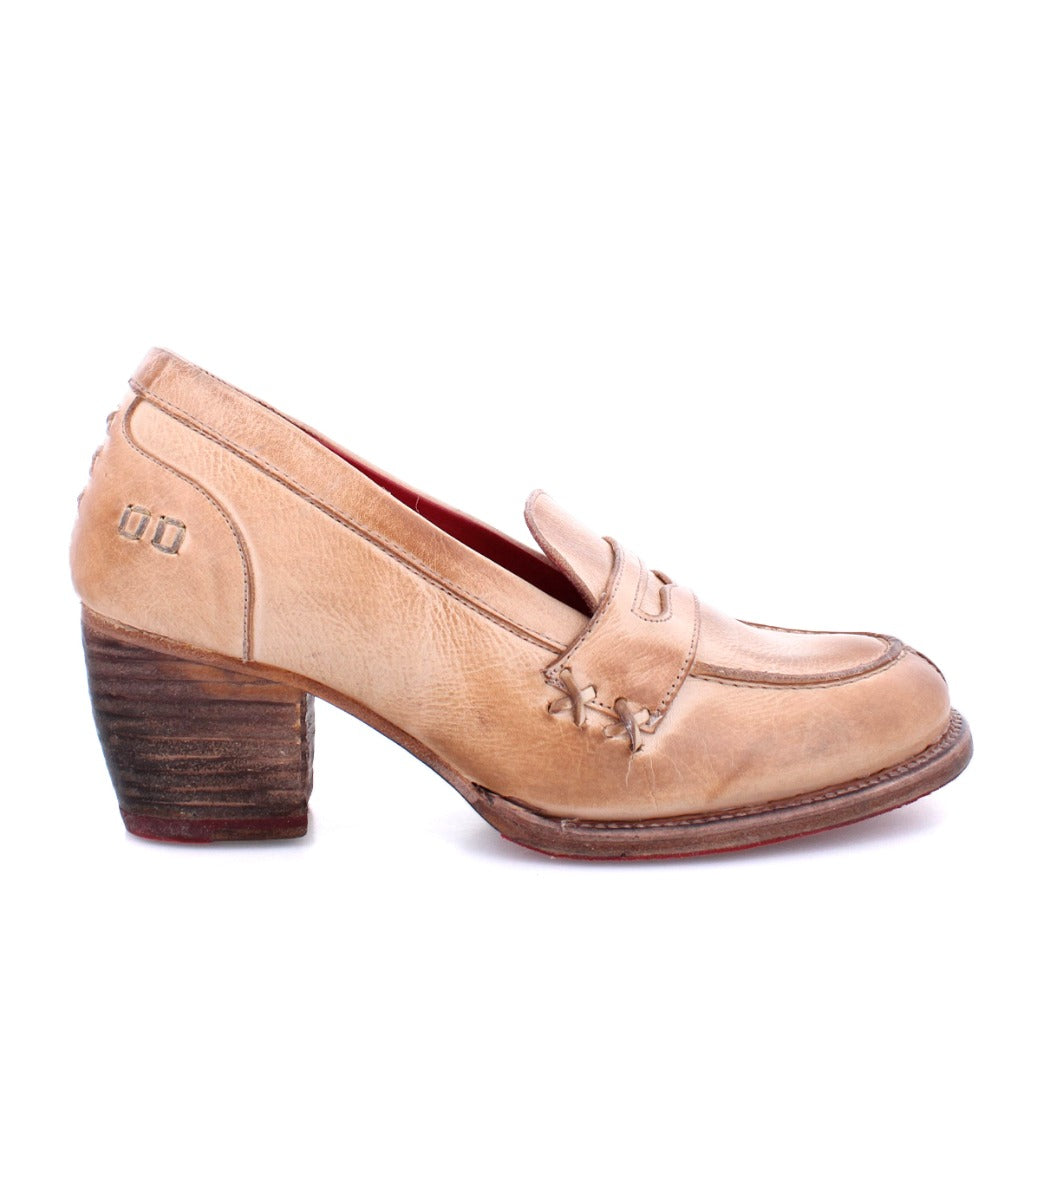 A women's beige Liberty loafer with a wooden heel, made by Bed Stu.